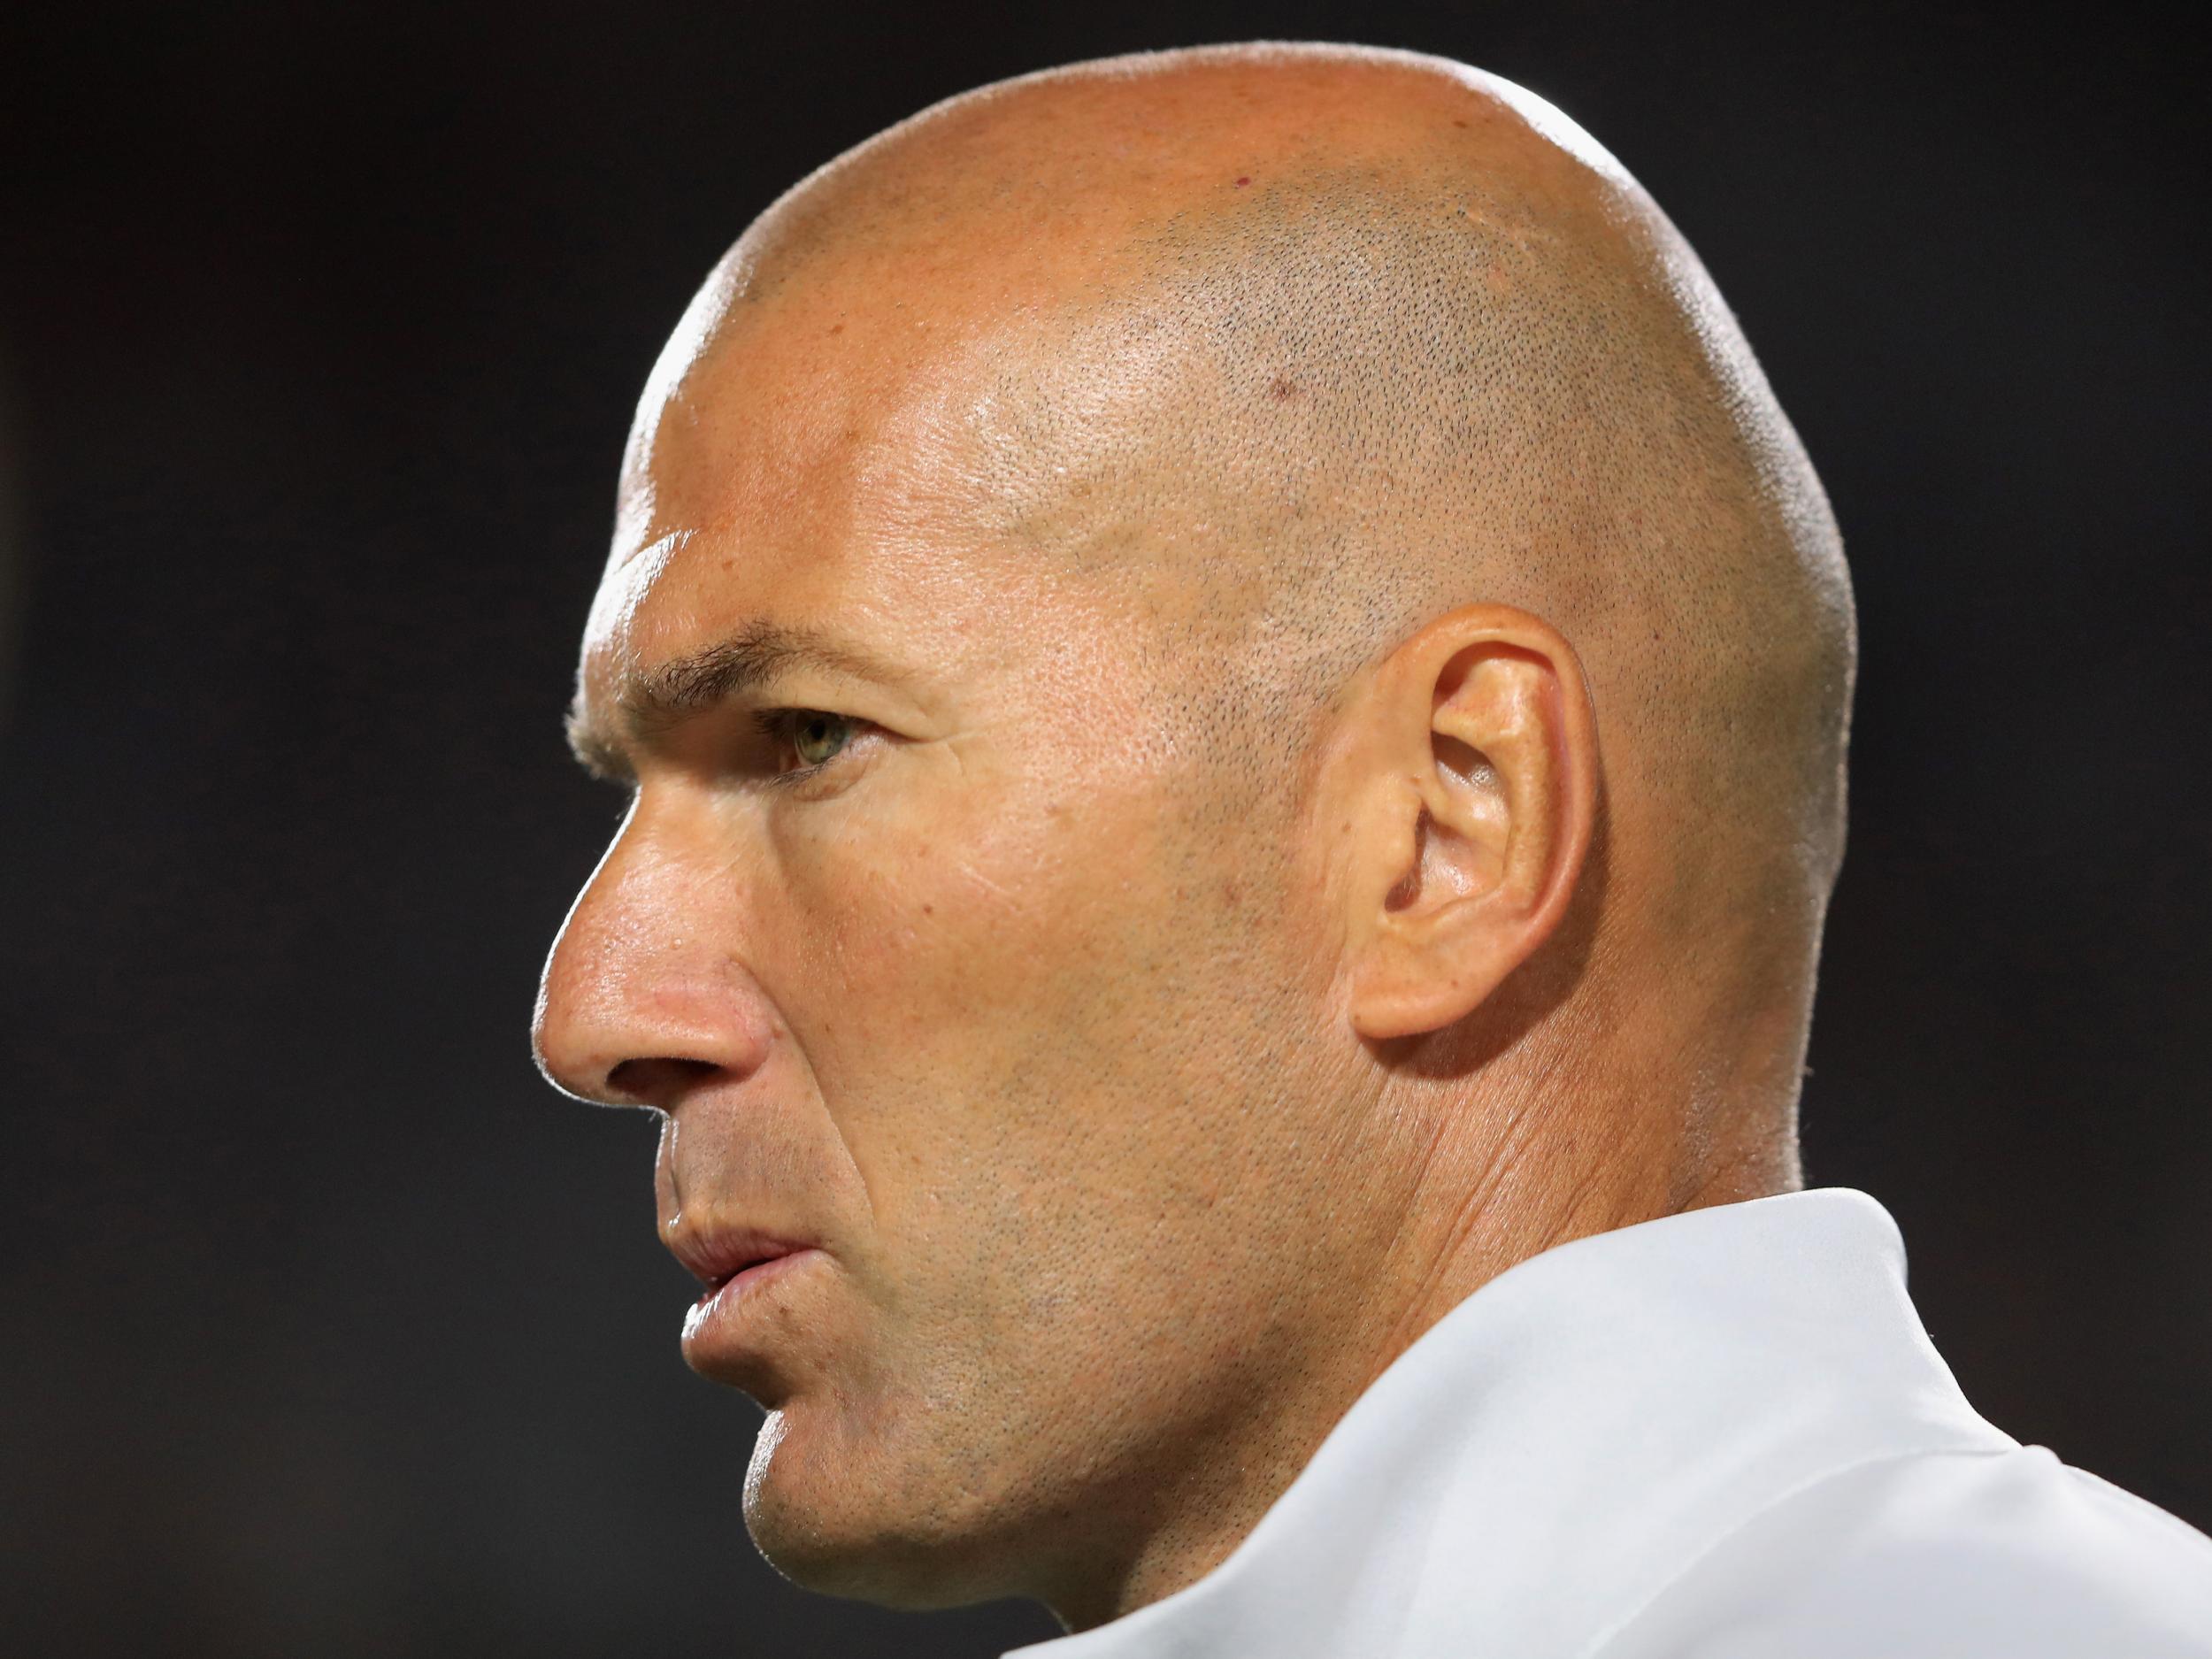 Zidane led Madrid to a domestic and European double last season but things haven't gone to plan this summer